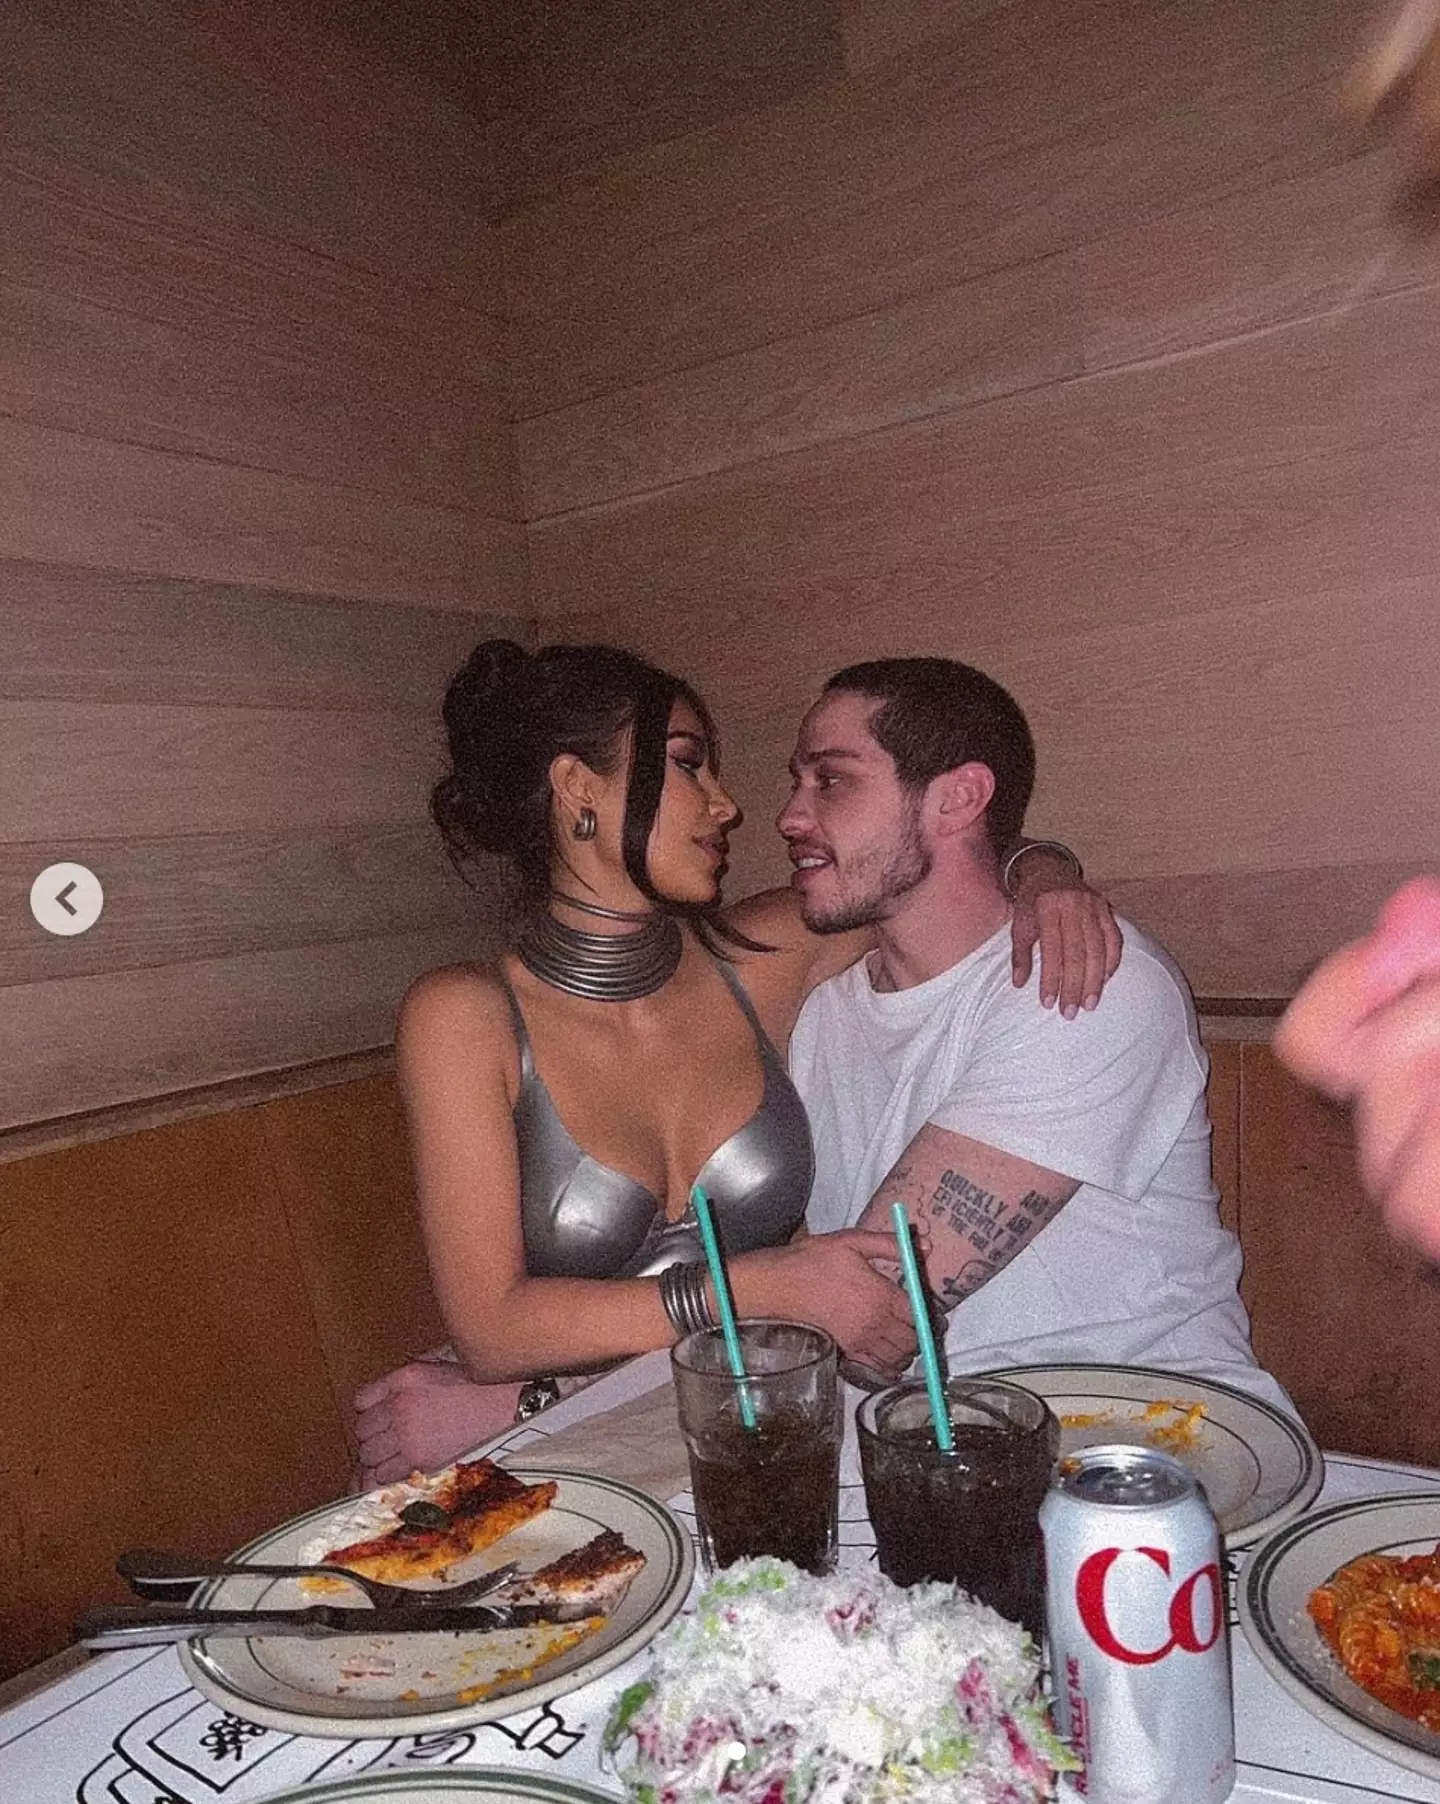 It appeared their ‘late night snack’ was a bit of a mismatch of pizza, fried chicken, coleslaw and a huge centrepiece salad - with some cola to wash it down (Instagram @kimkardashian).